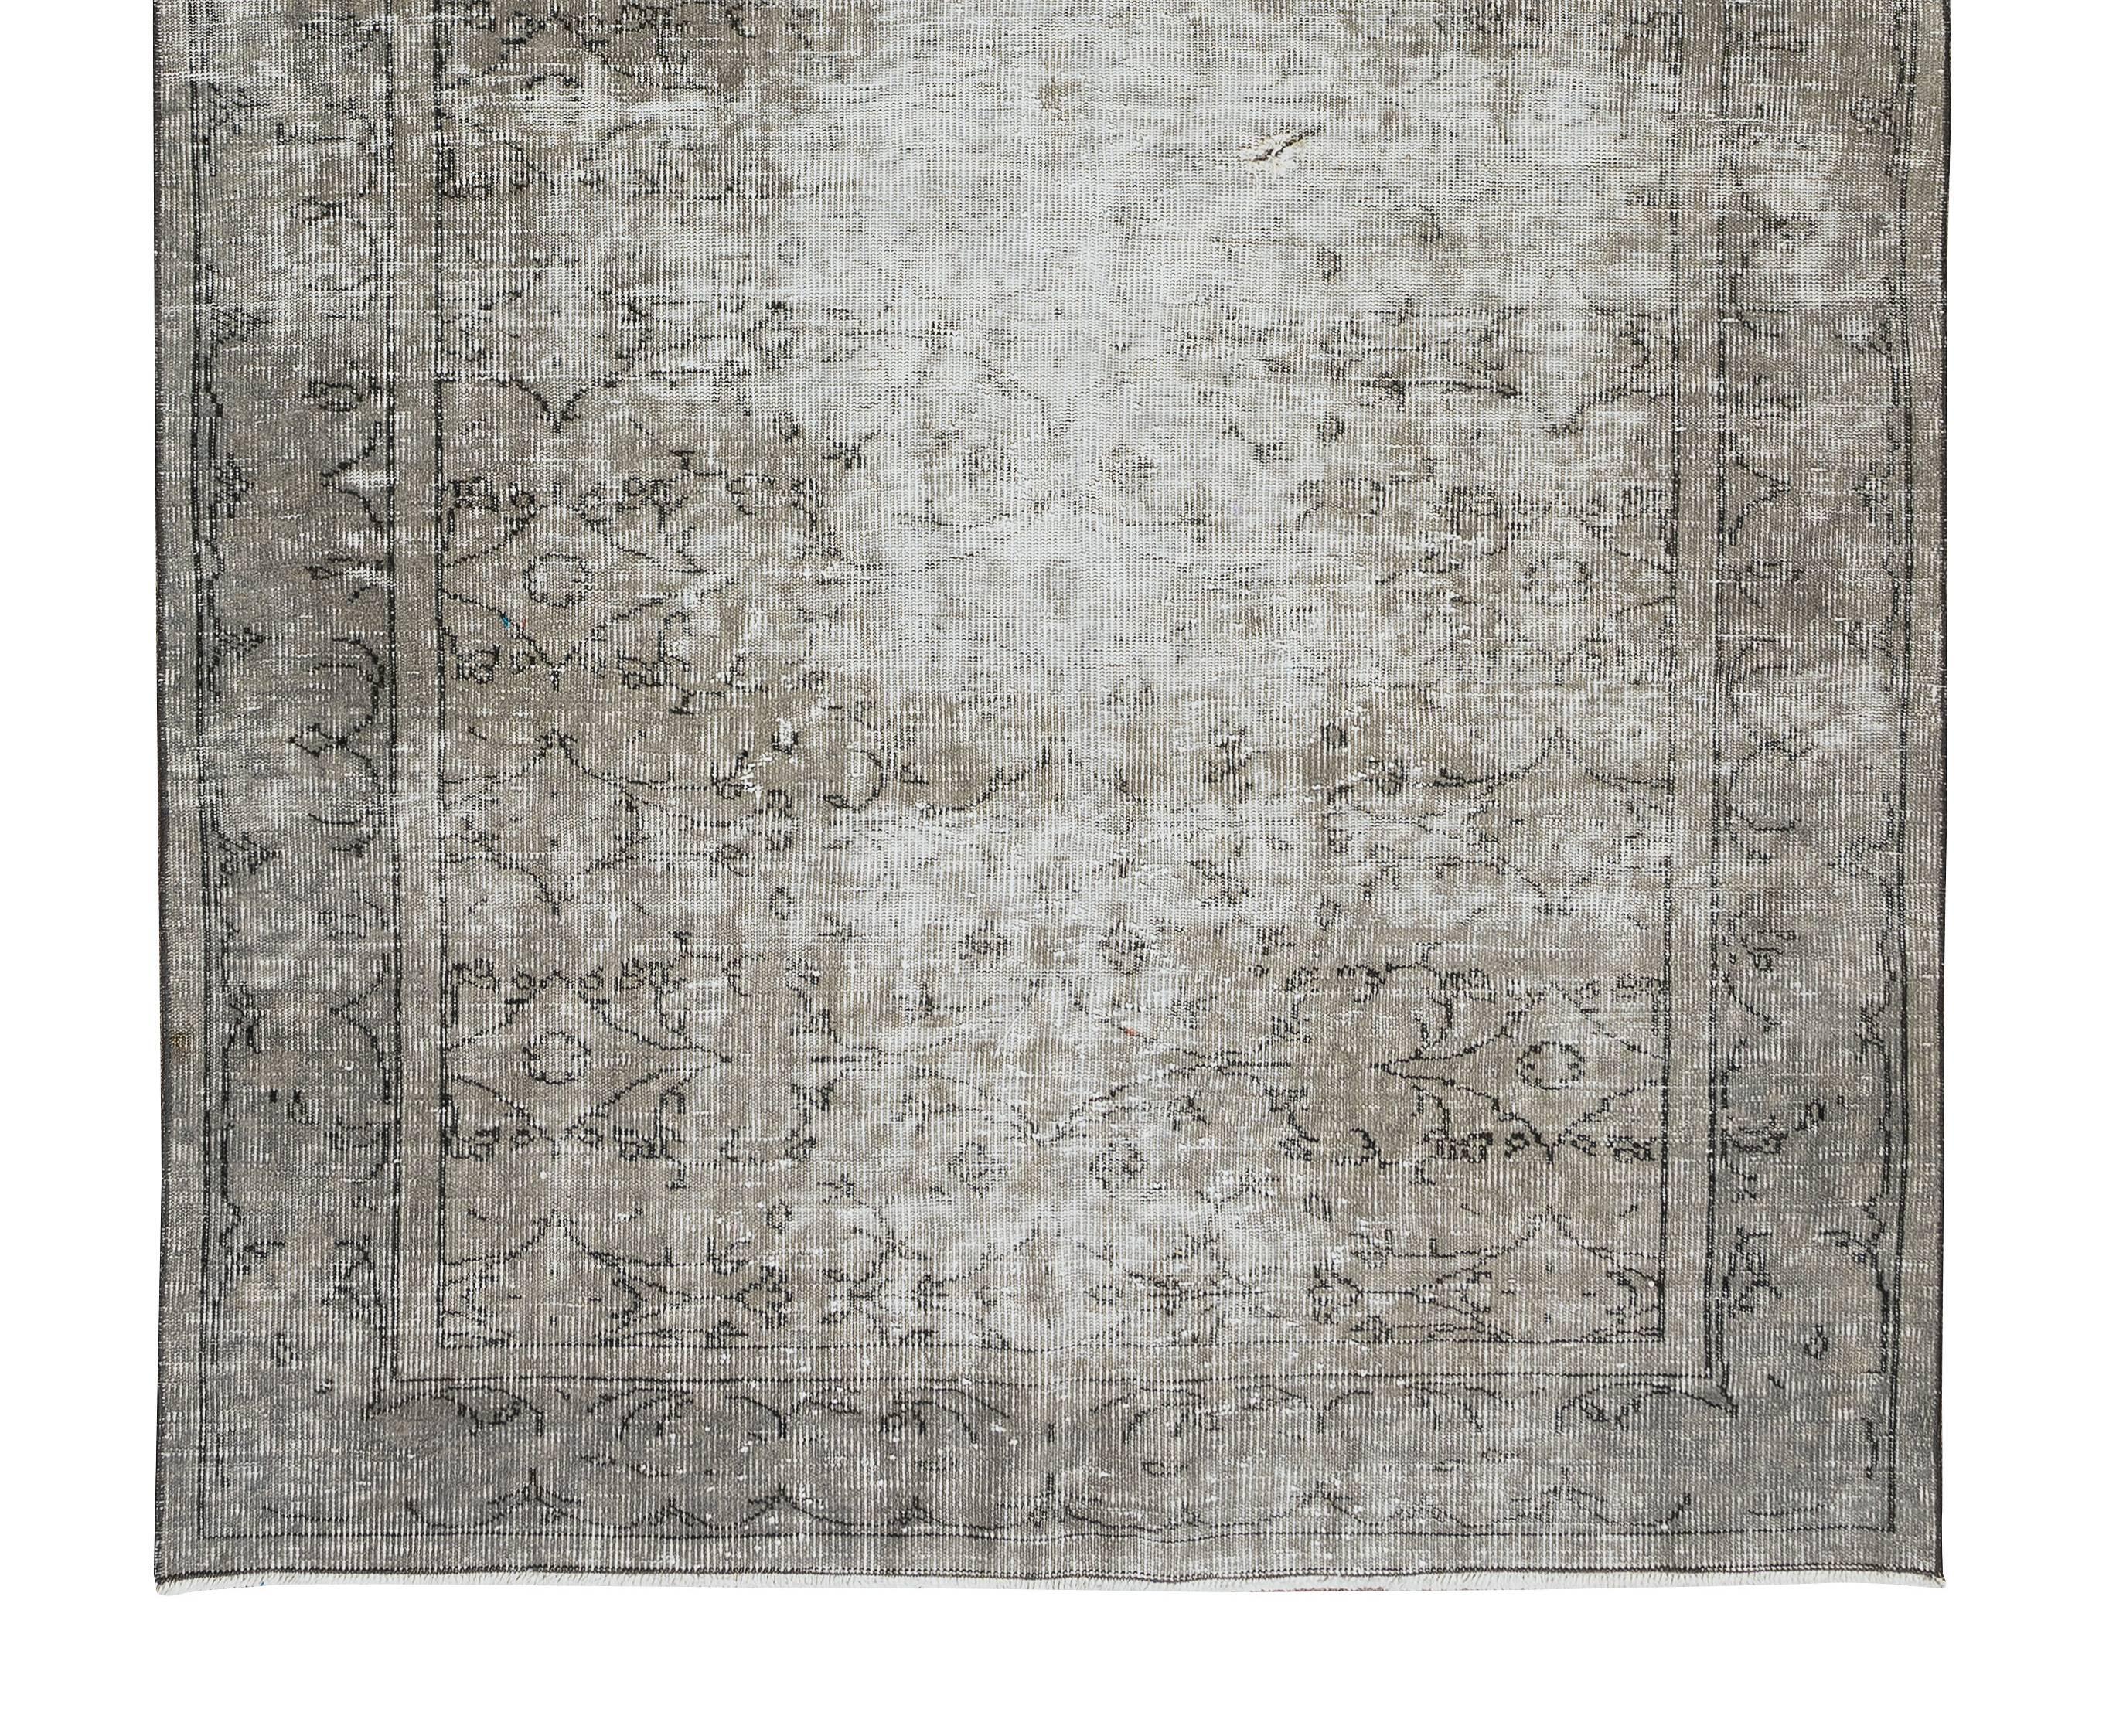 Hand-Woven 5.3x8.9 Ft Distressed 1950s Handmade Anatolian Area Rug Over-Dyed in Gray Color For Sale